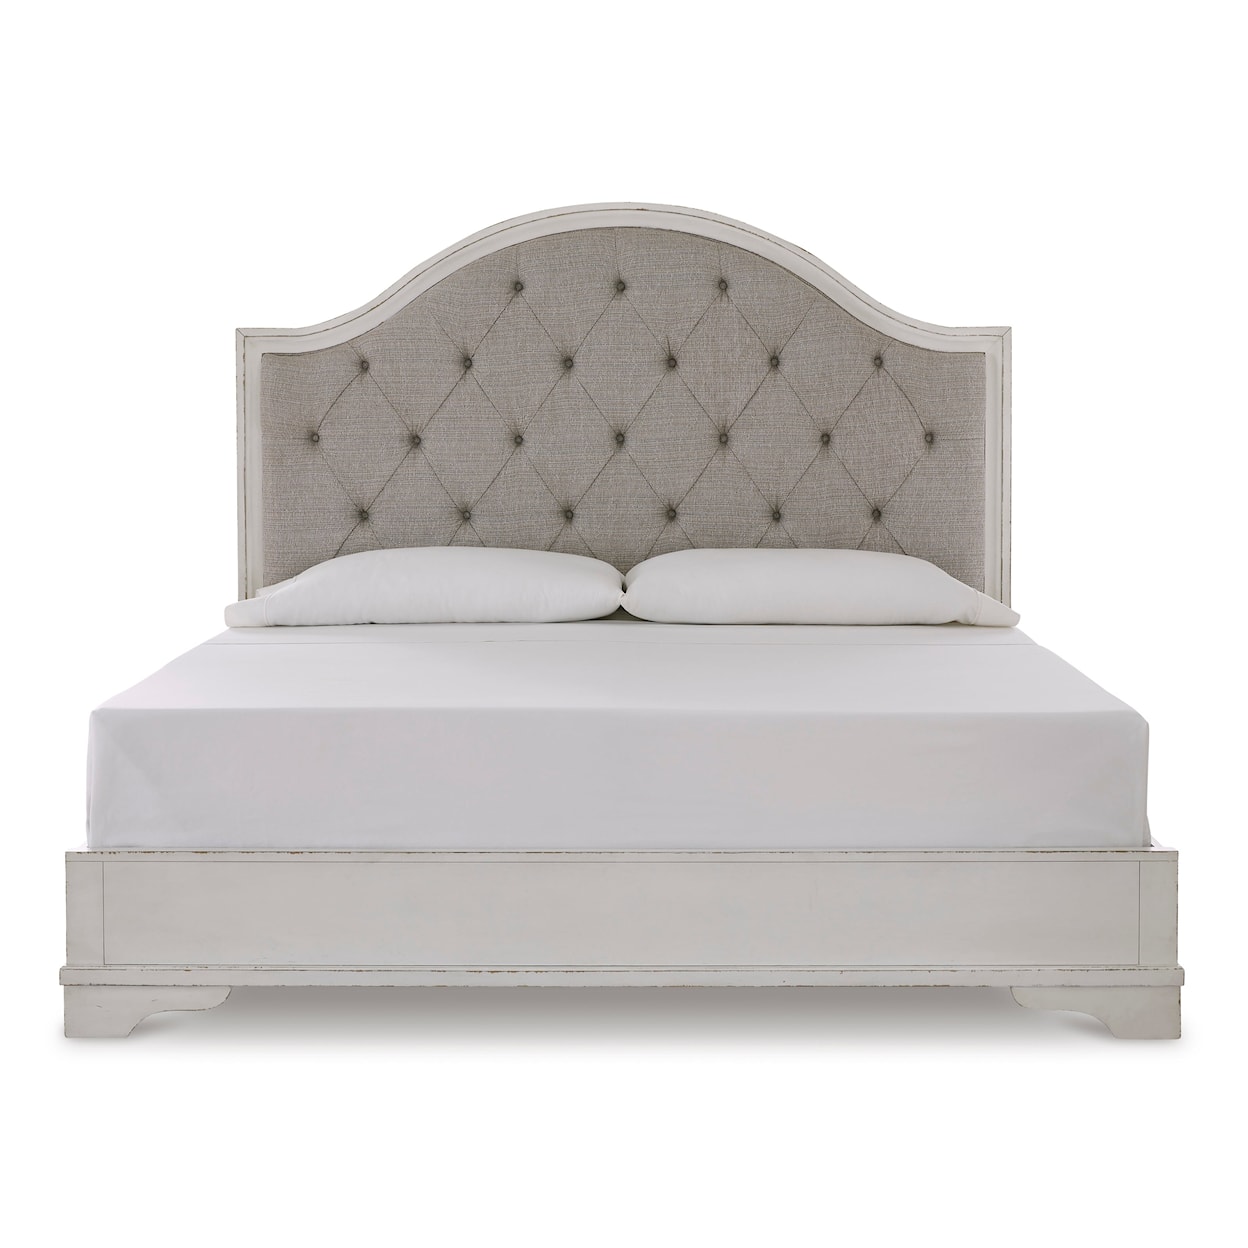 Signature Design Brollyn King Bed